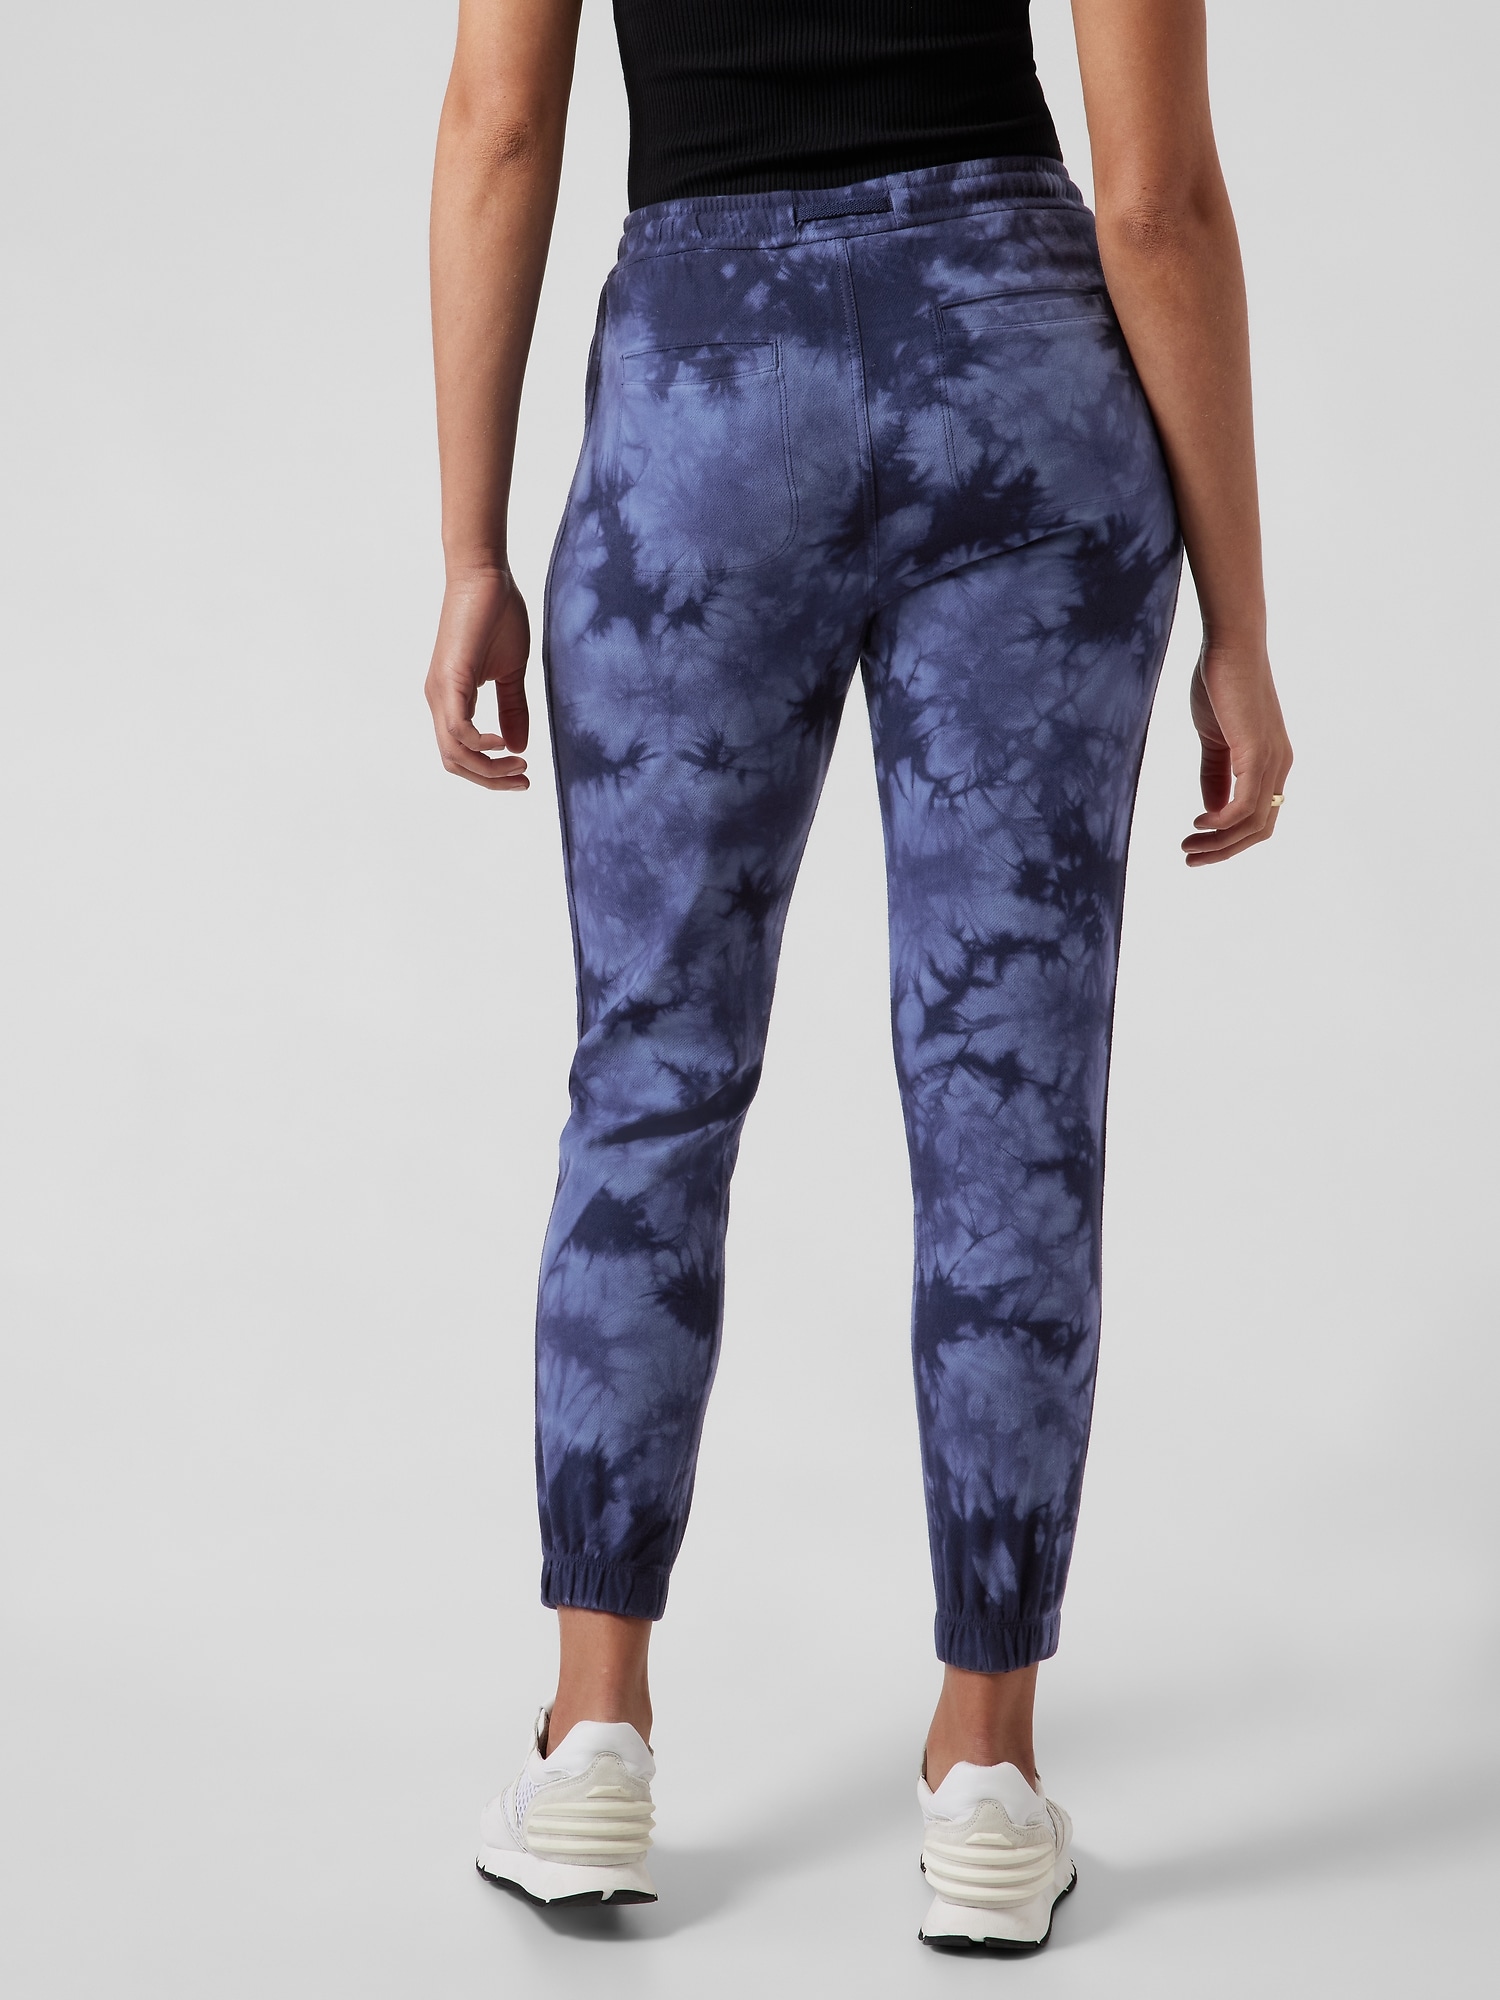 Athleta Women's Blue Tie Dye Fitted Athletic Leggings XS Extra Small RN54023